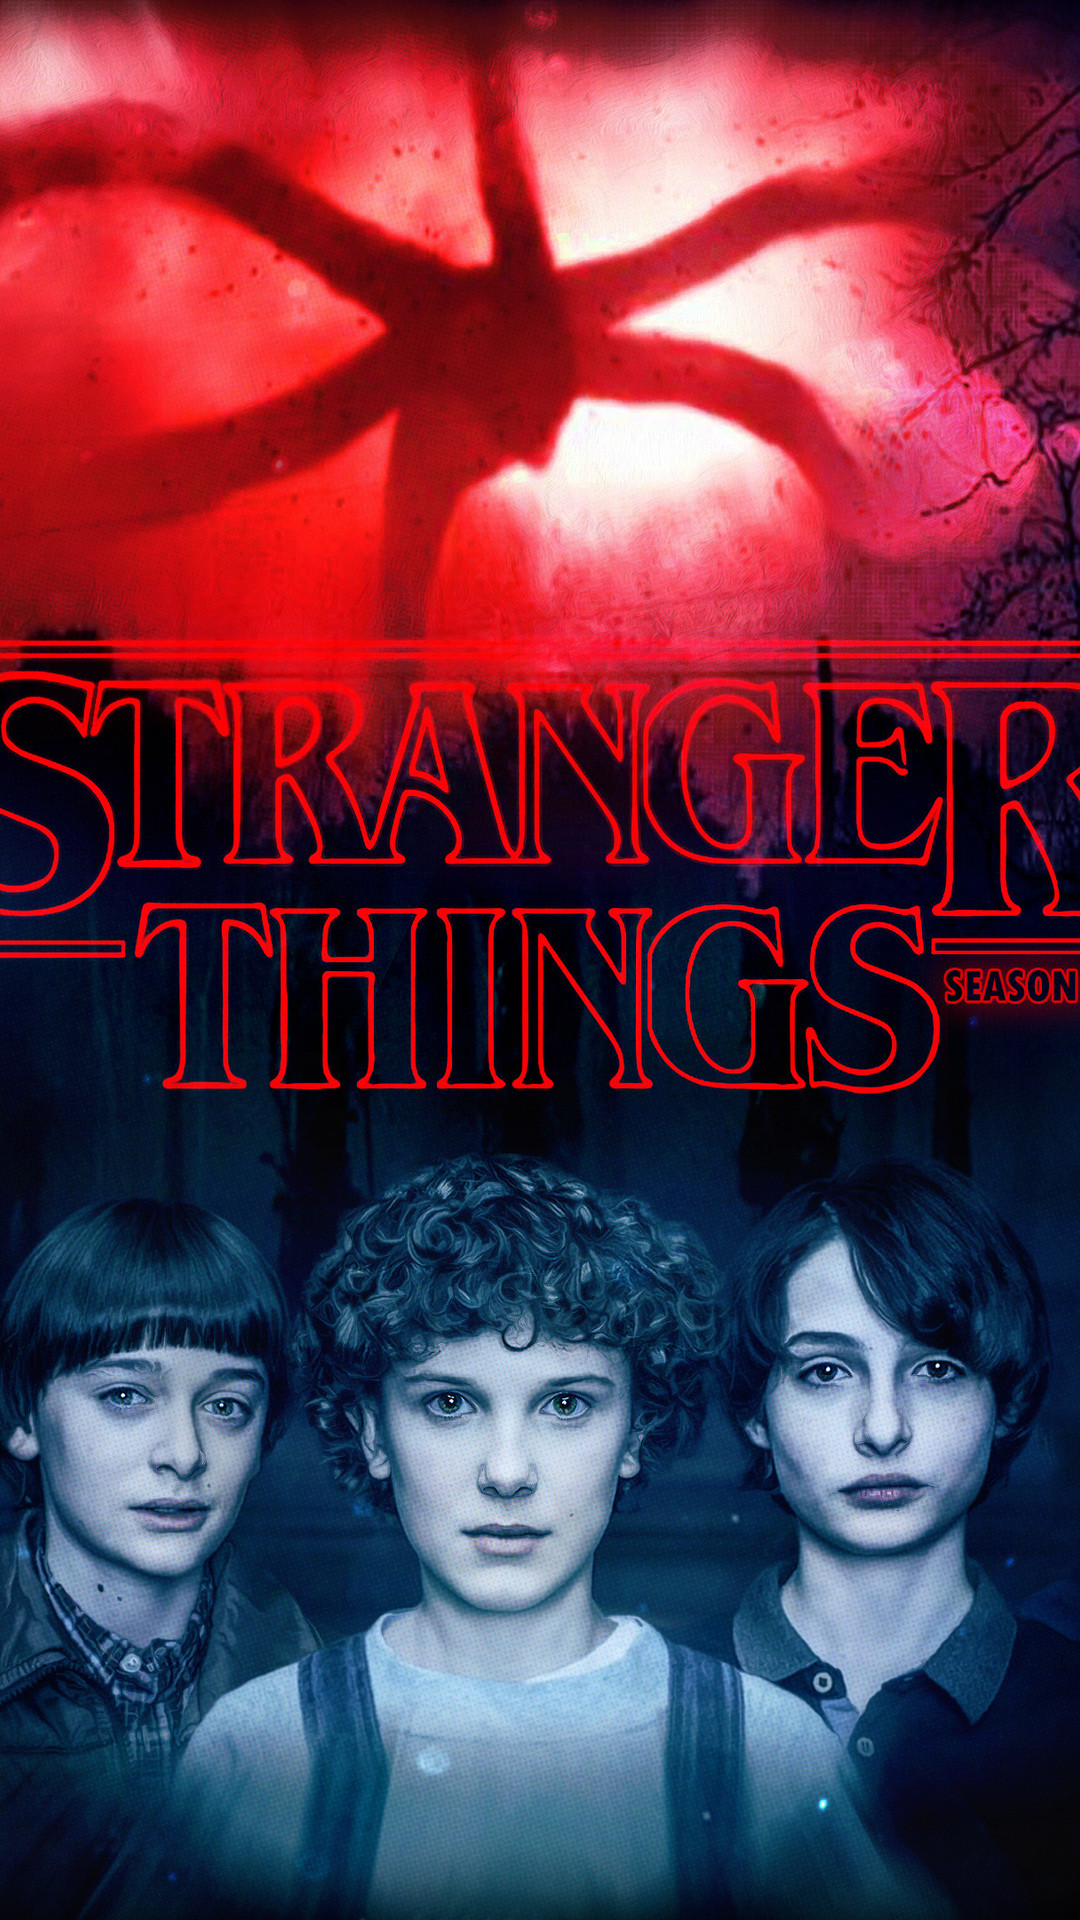 stranger things phone wallpaper,movie,poster,text,book cover,fiction